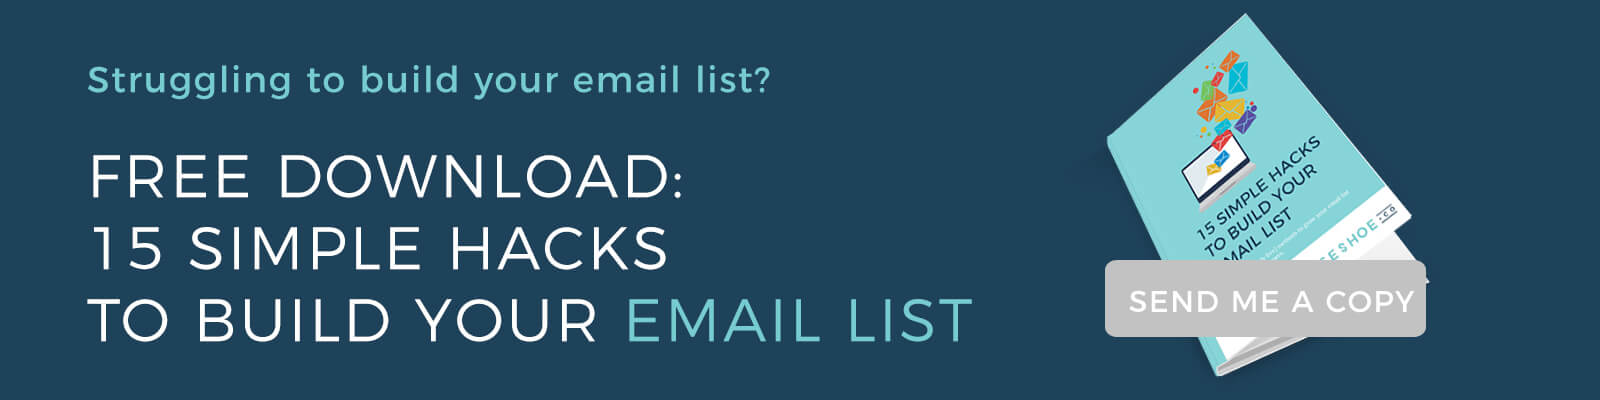 build your email list cta